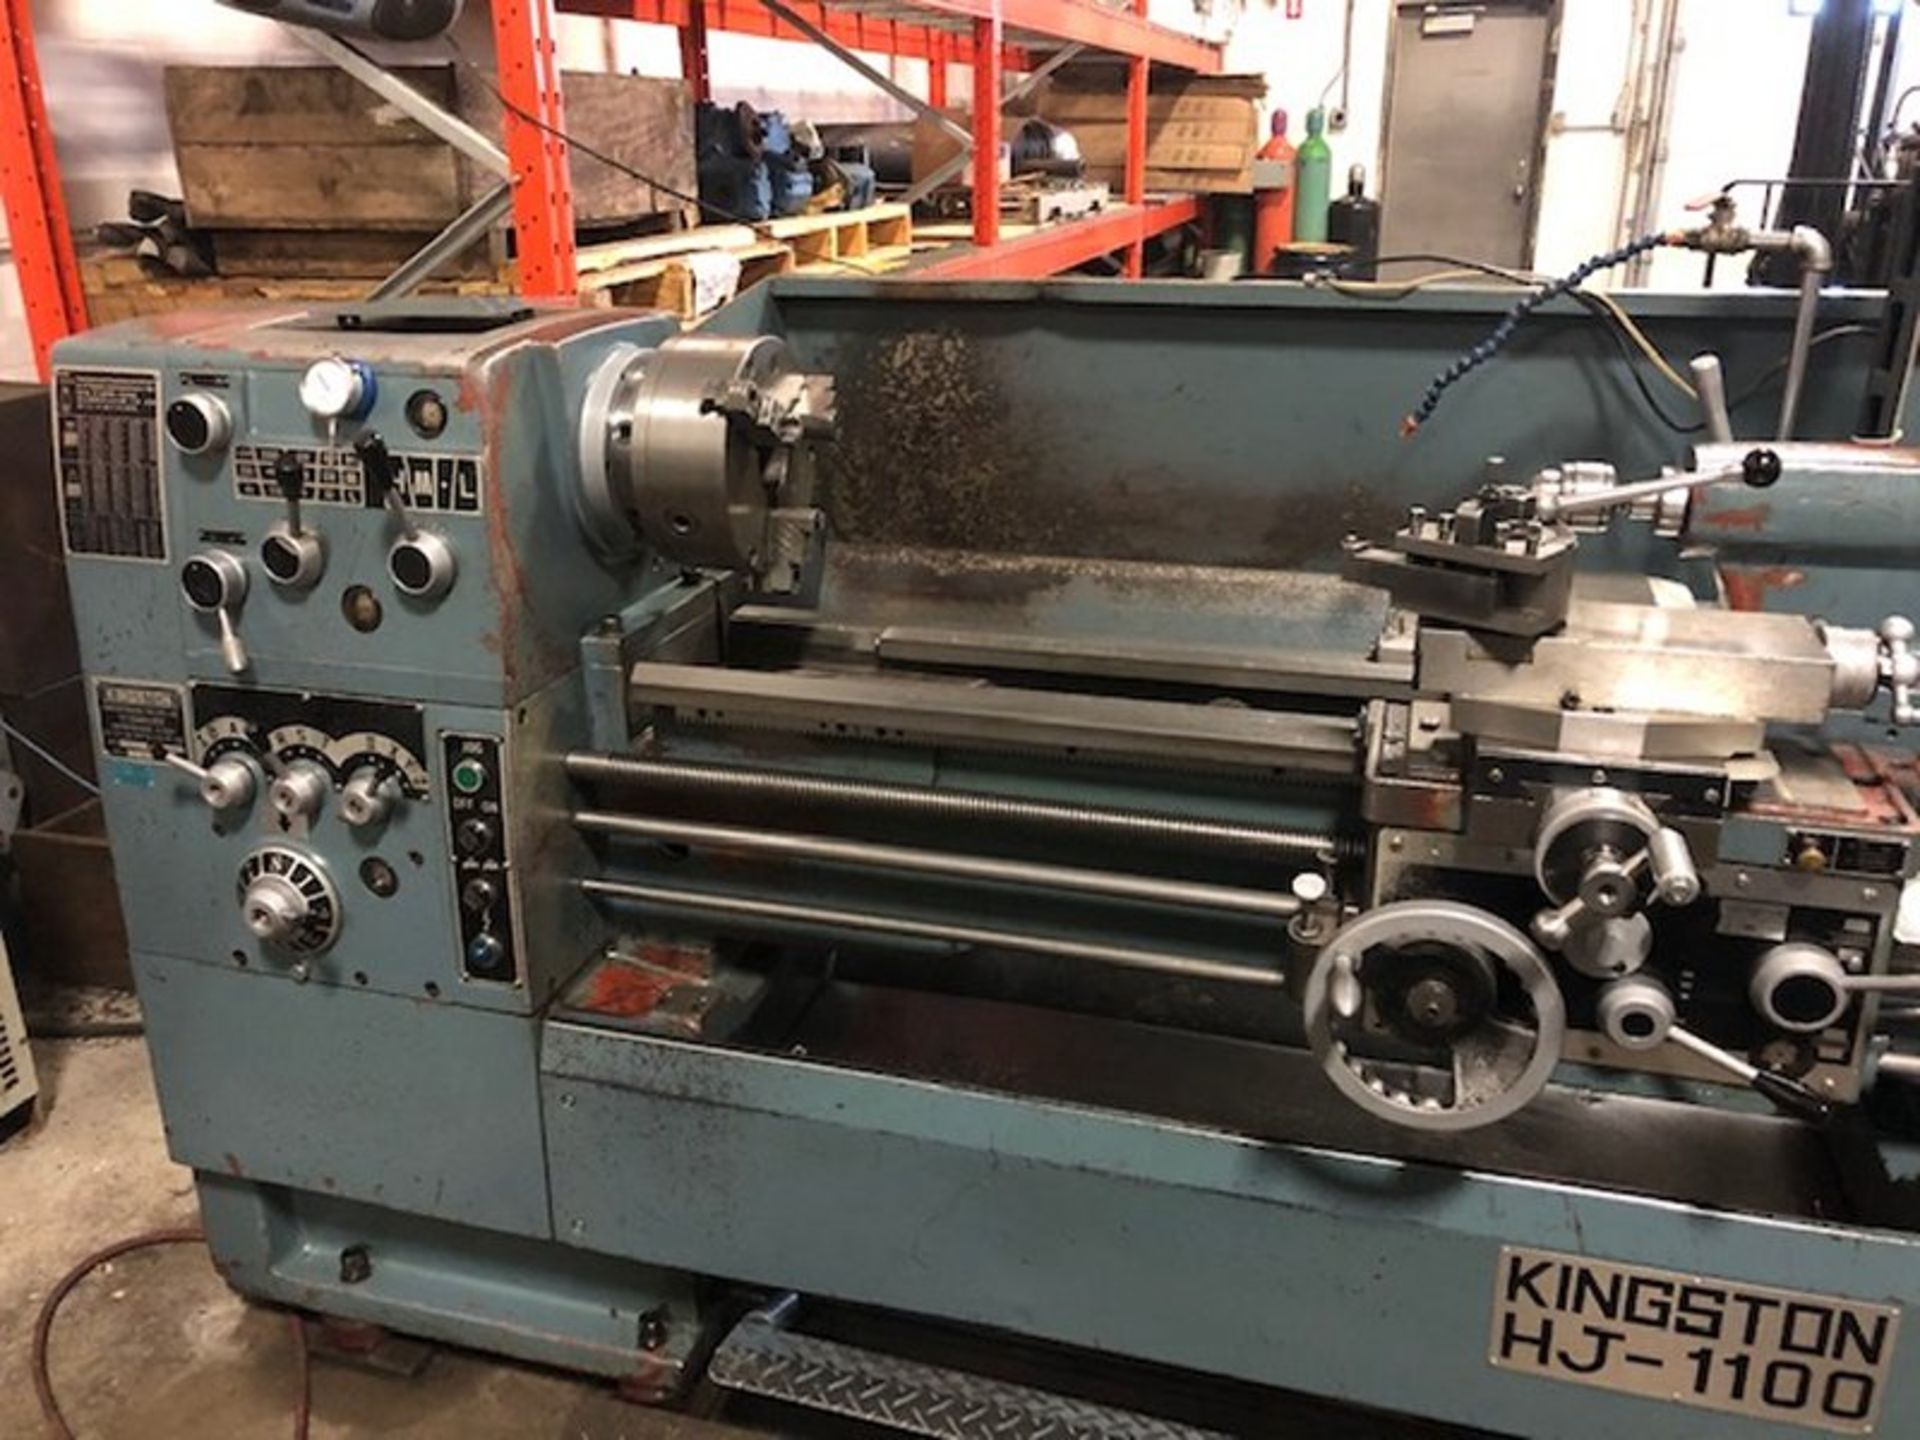 KINGSTON MODEL HJ-1100 TOOL ROOM LATHE, 2004, S/N CH04219 16IN X 40IN, NEWAL 2 AXIS DIGITAL READOUT - Image 5 of 5